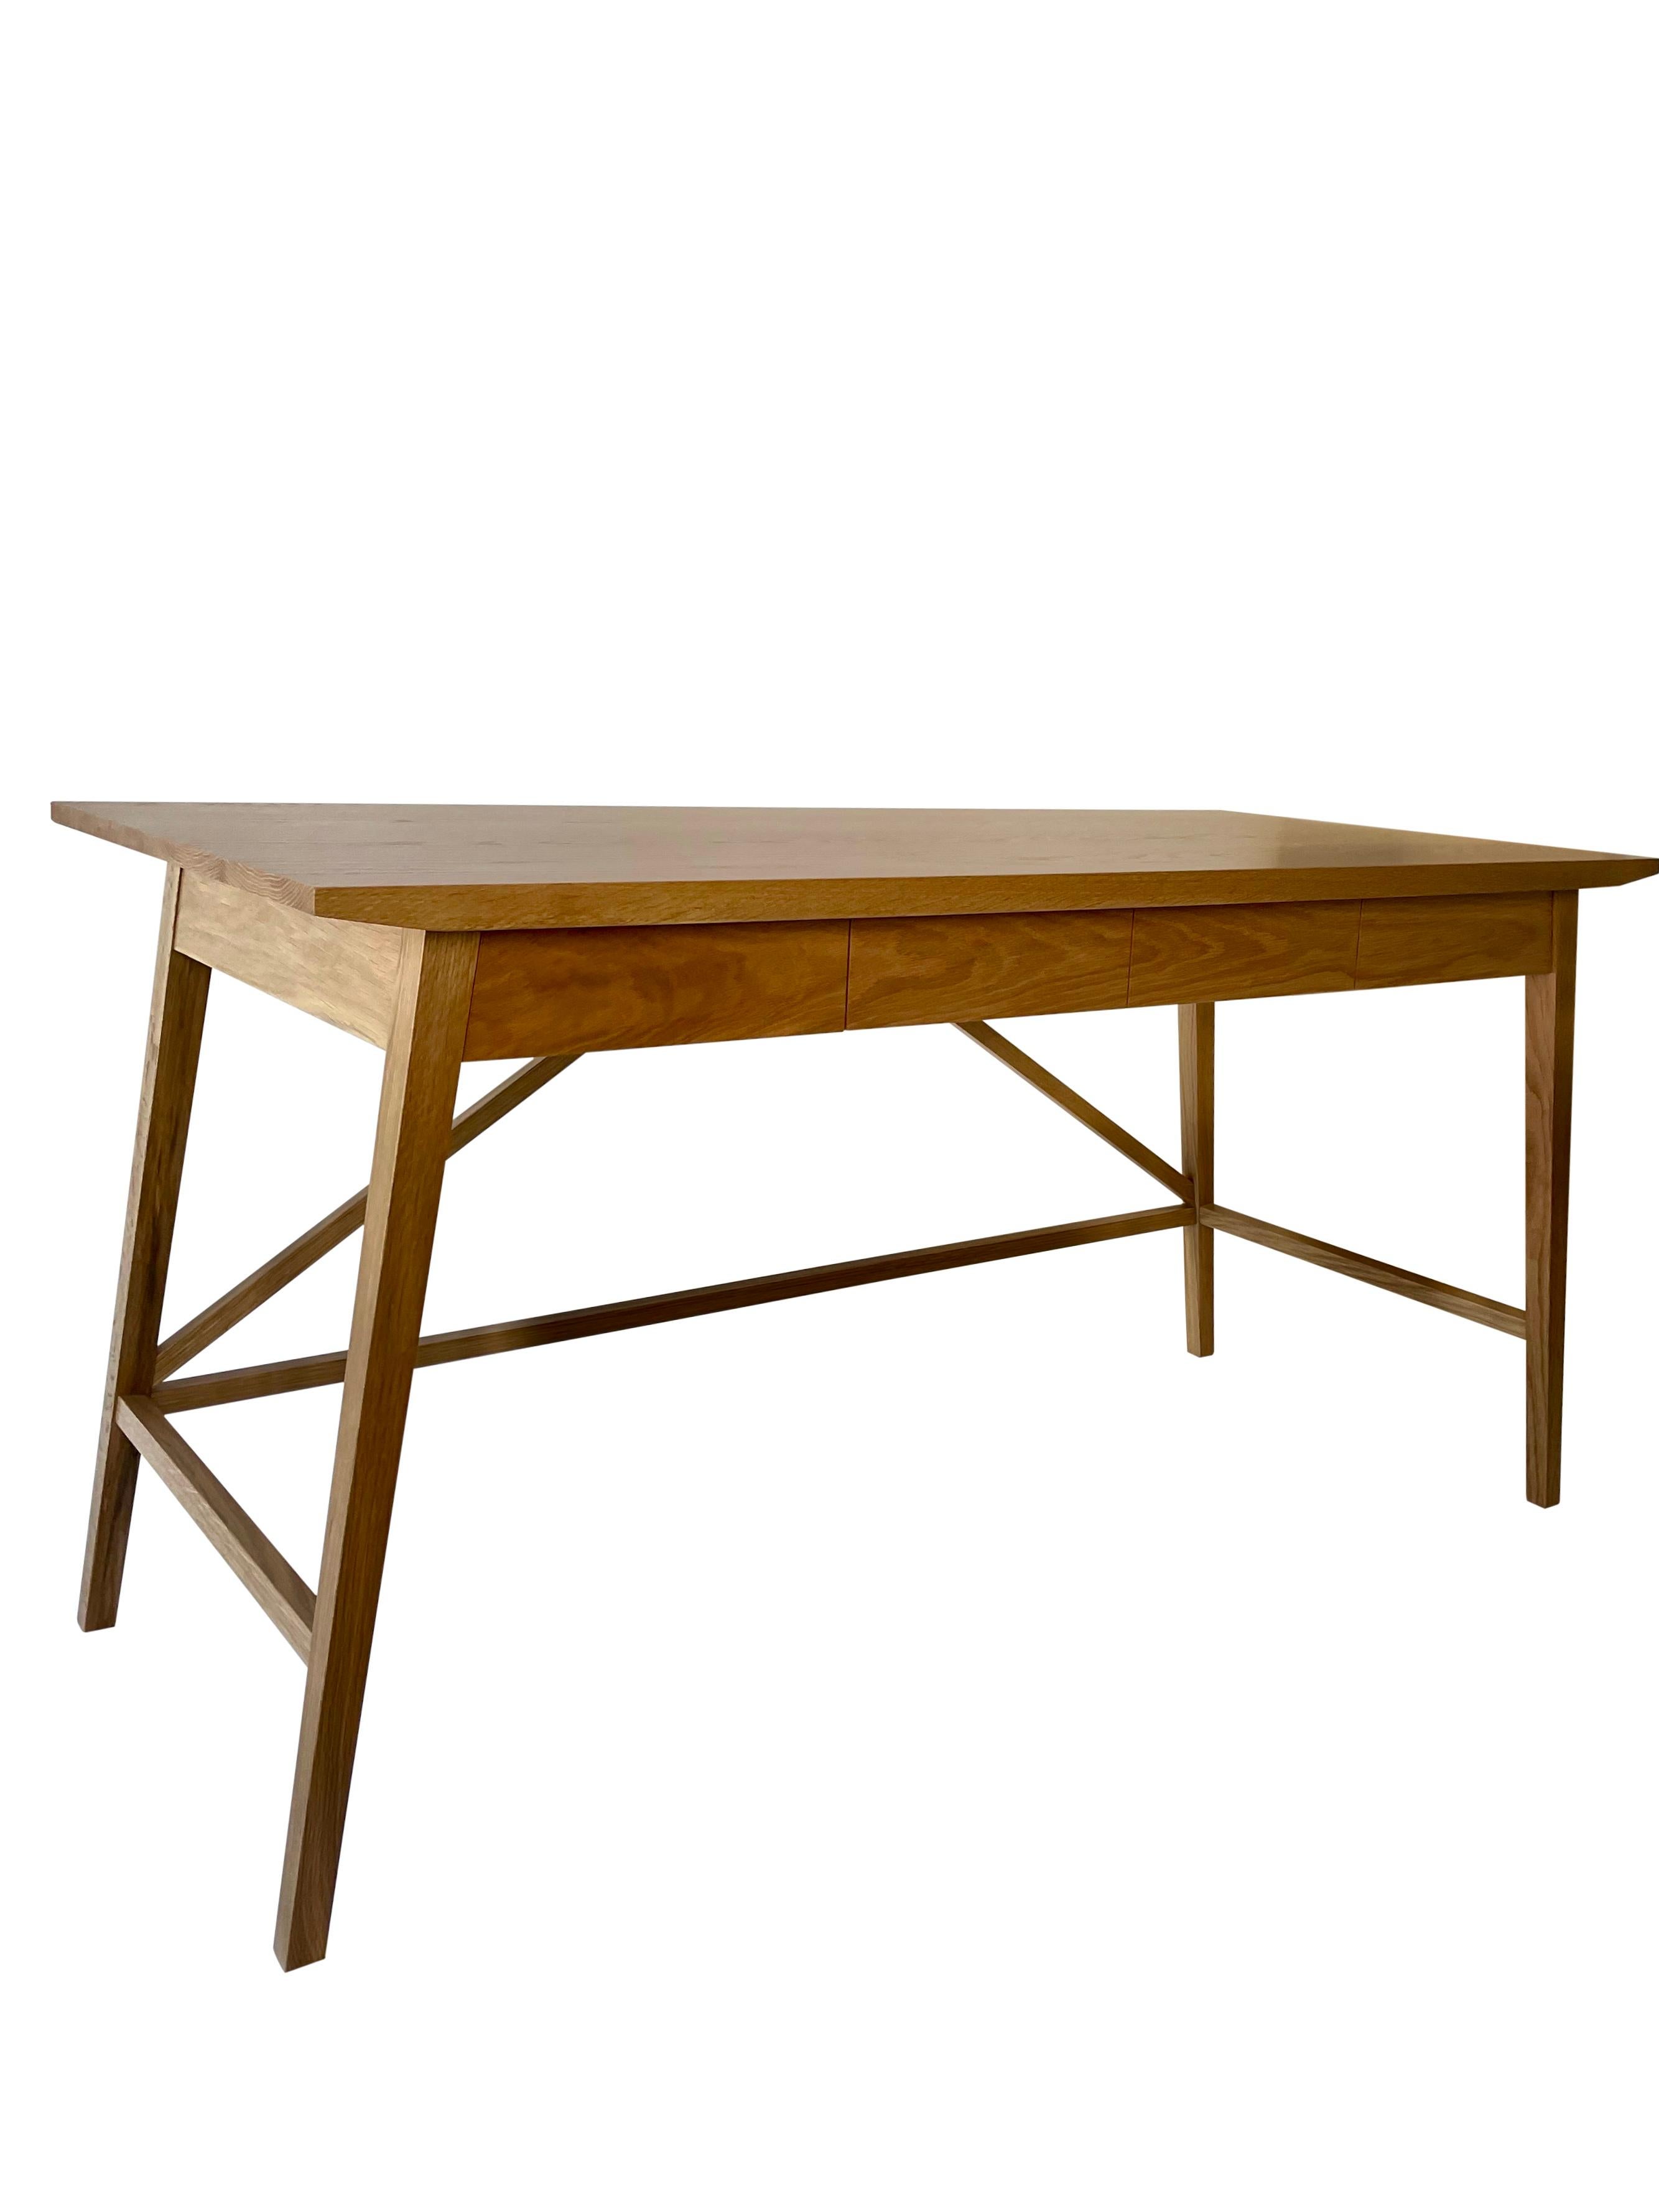 Mid-Century Modern Contemporary Desk in White Oak with Pencil Drawers by Boyd & Allister For Sale